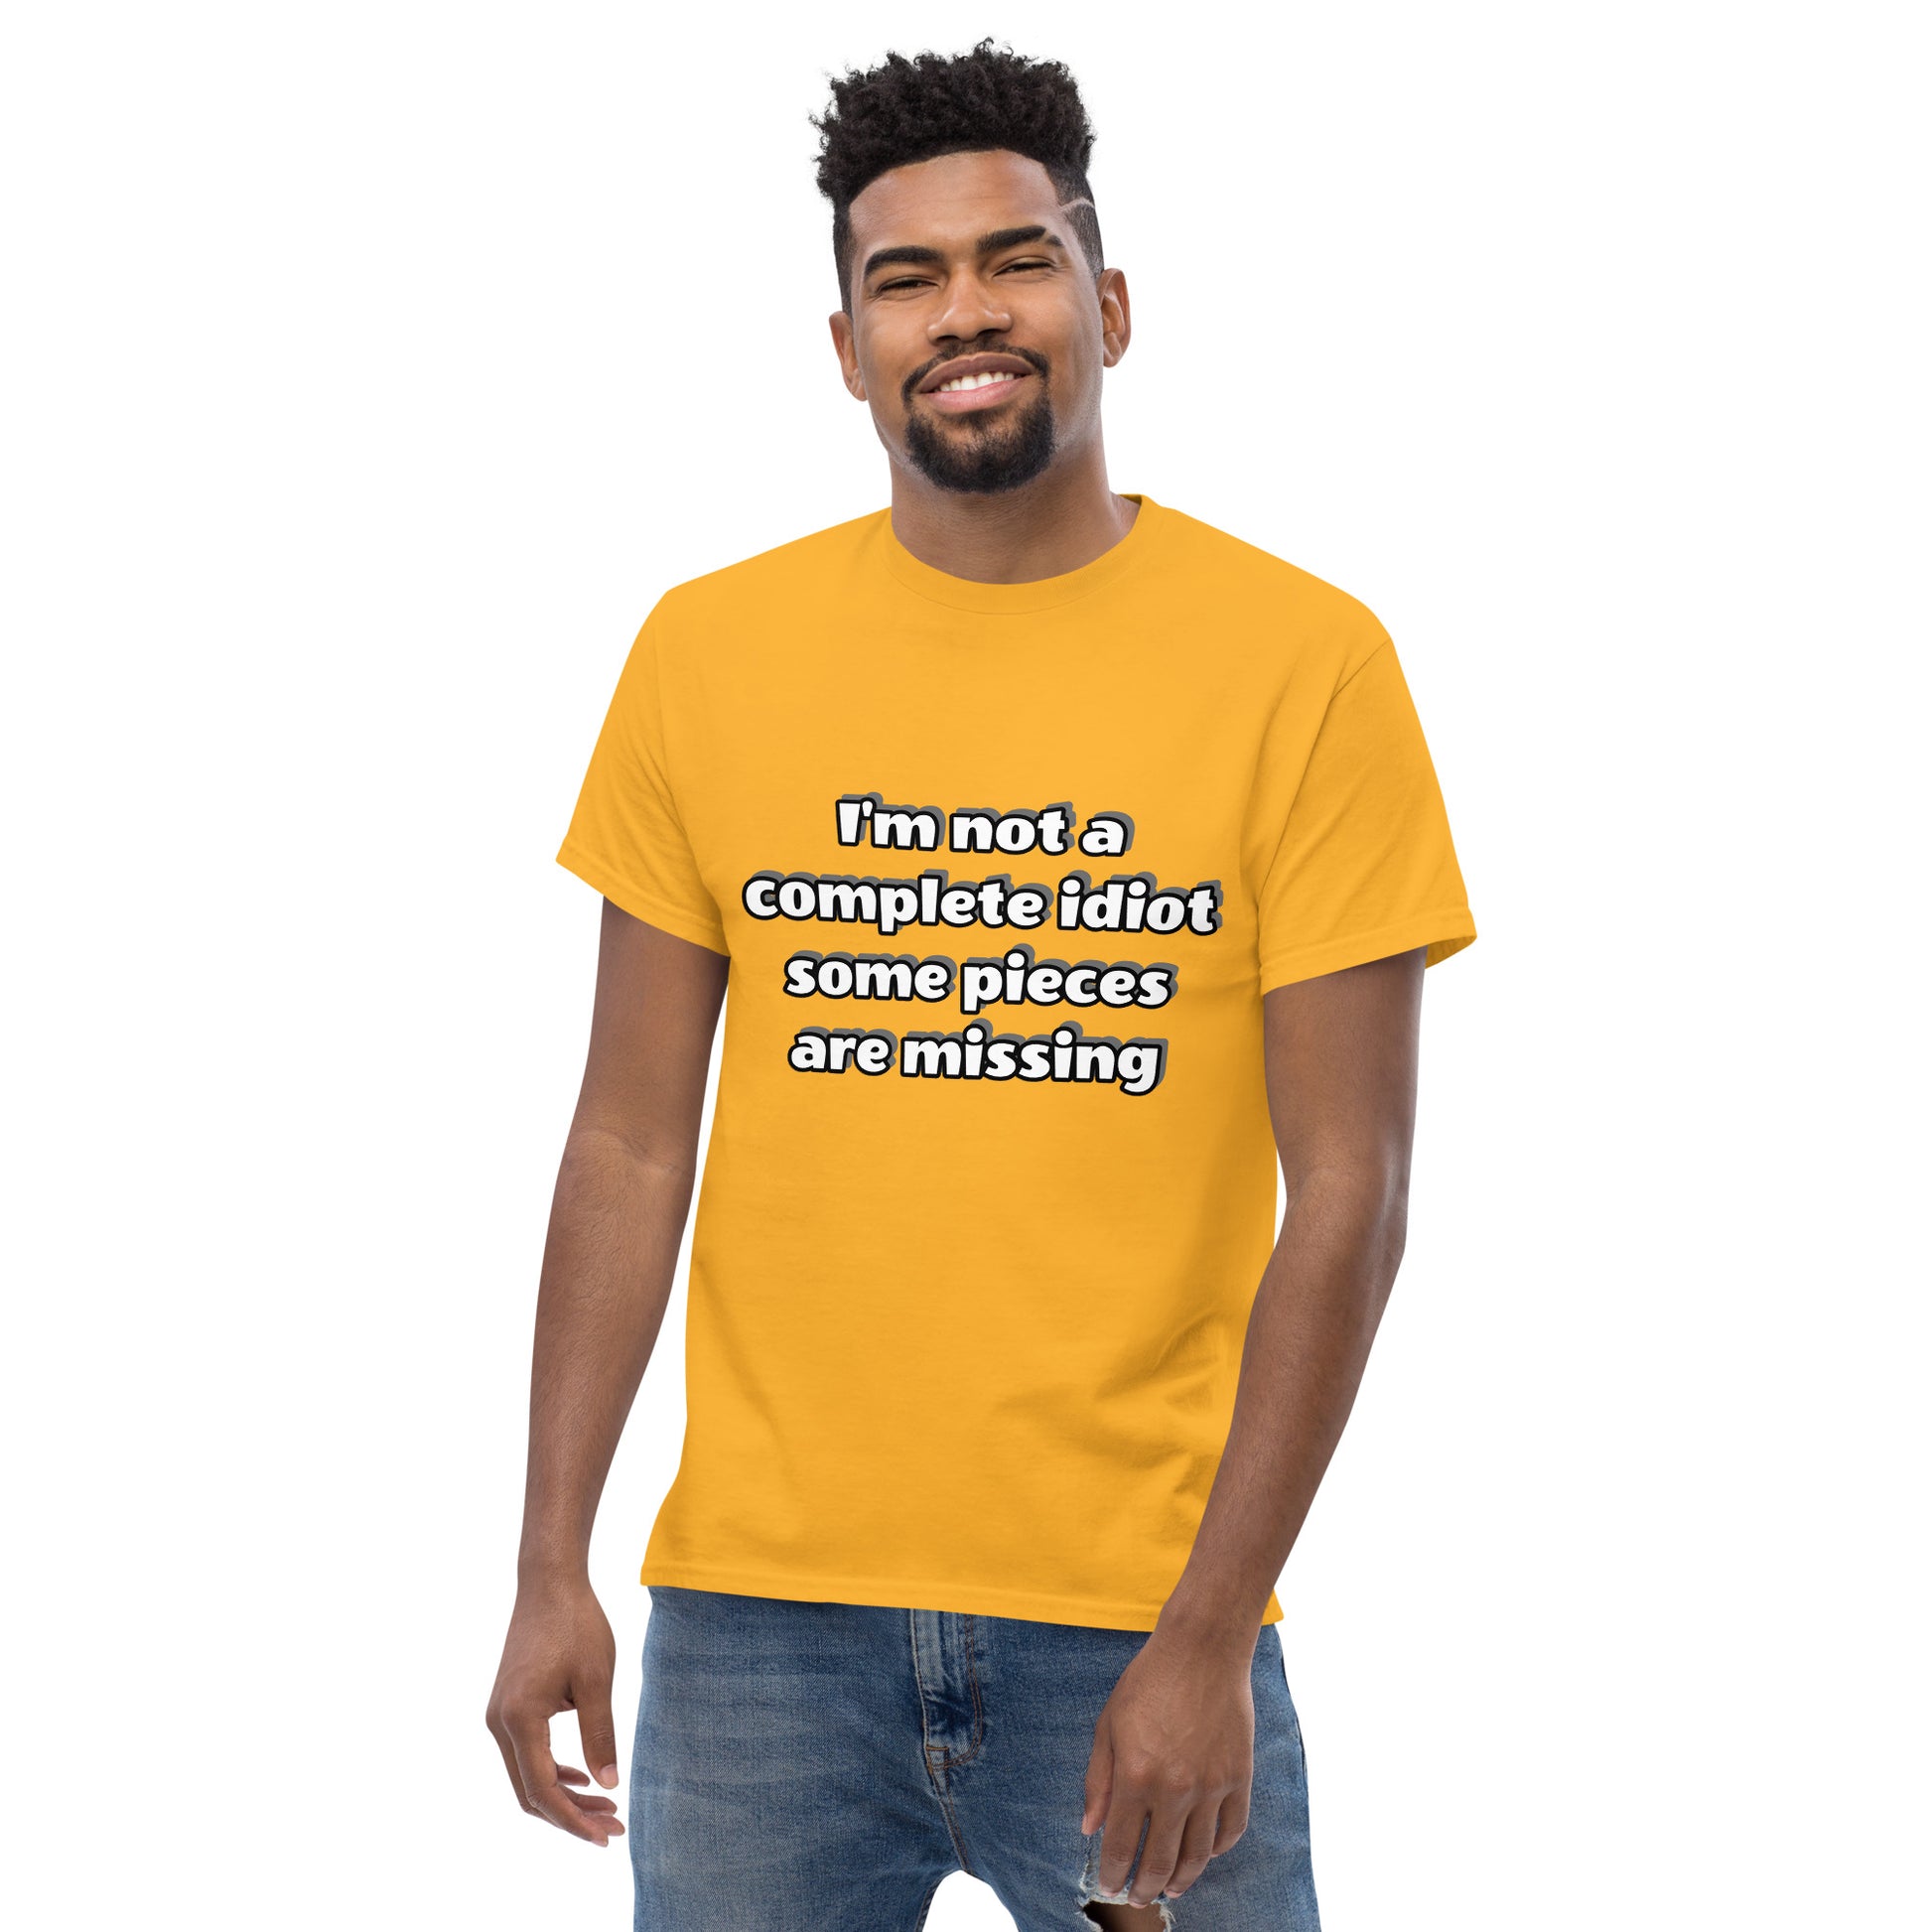 Men with yellow t-shirt with text “I’m not a complete idiot, some pieces are missing”